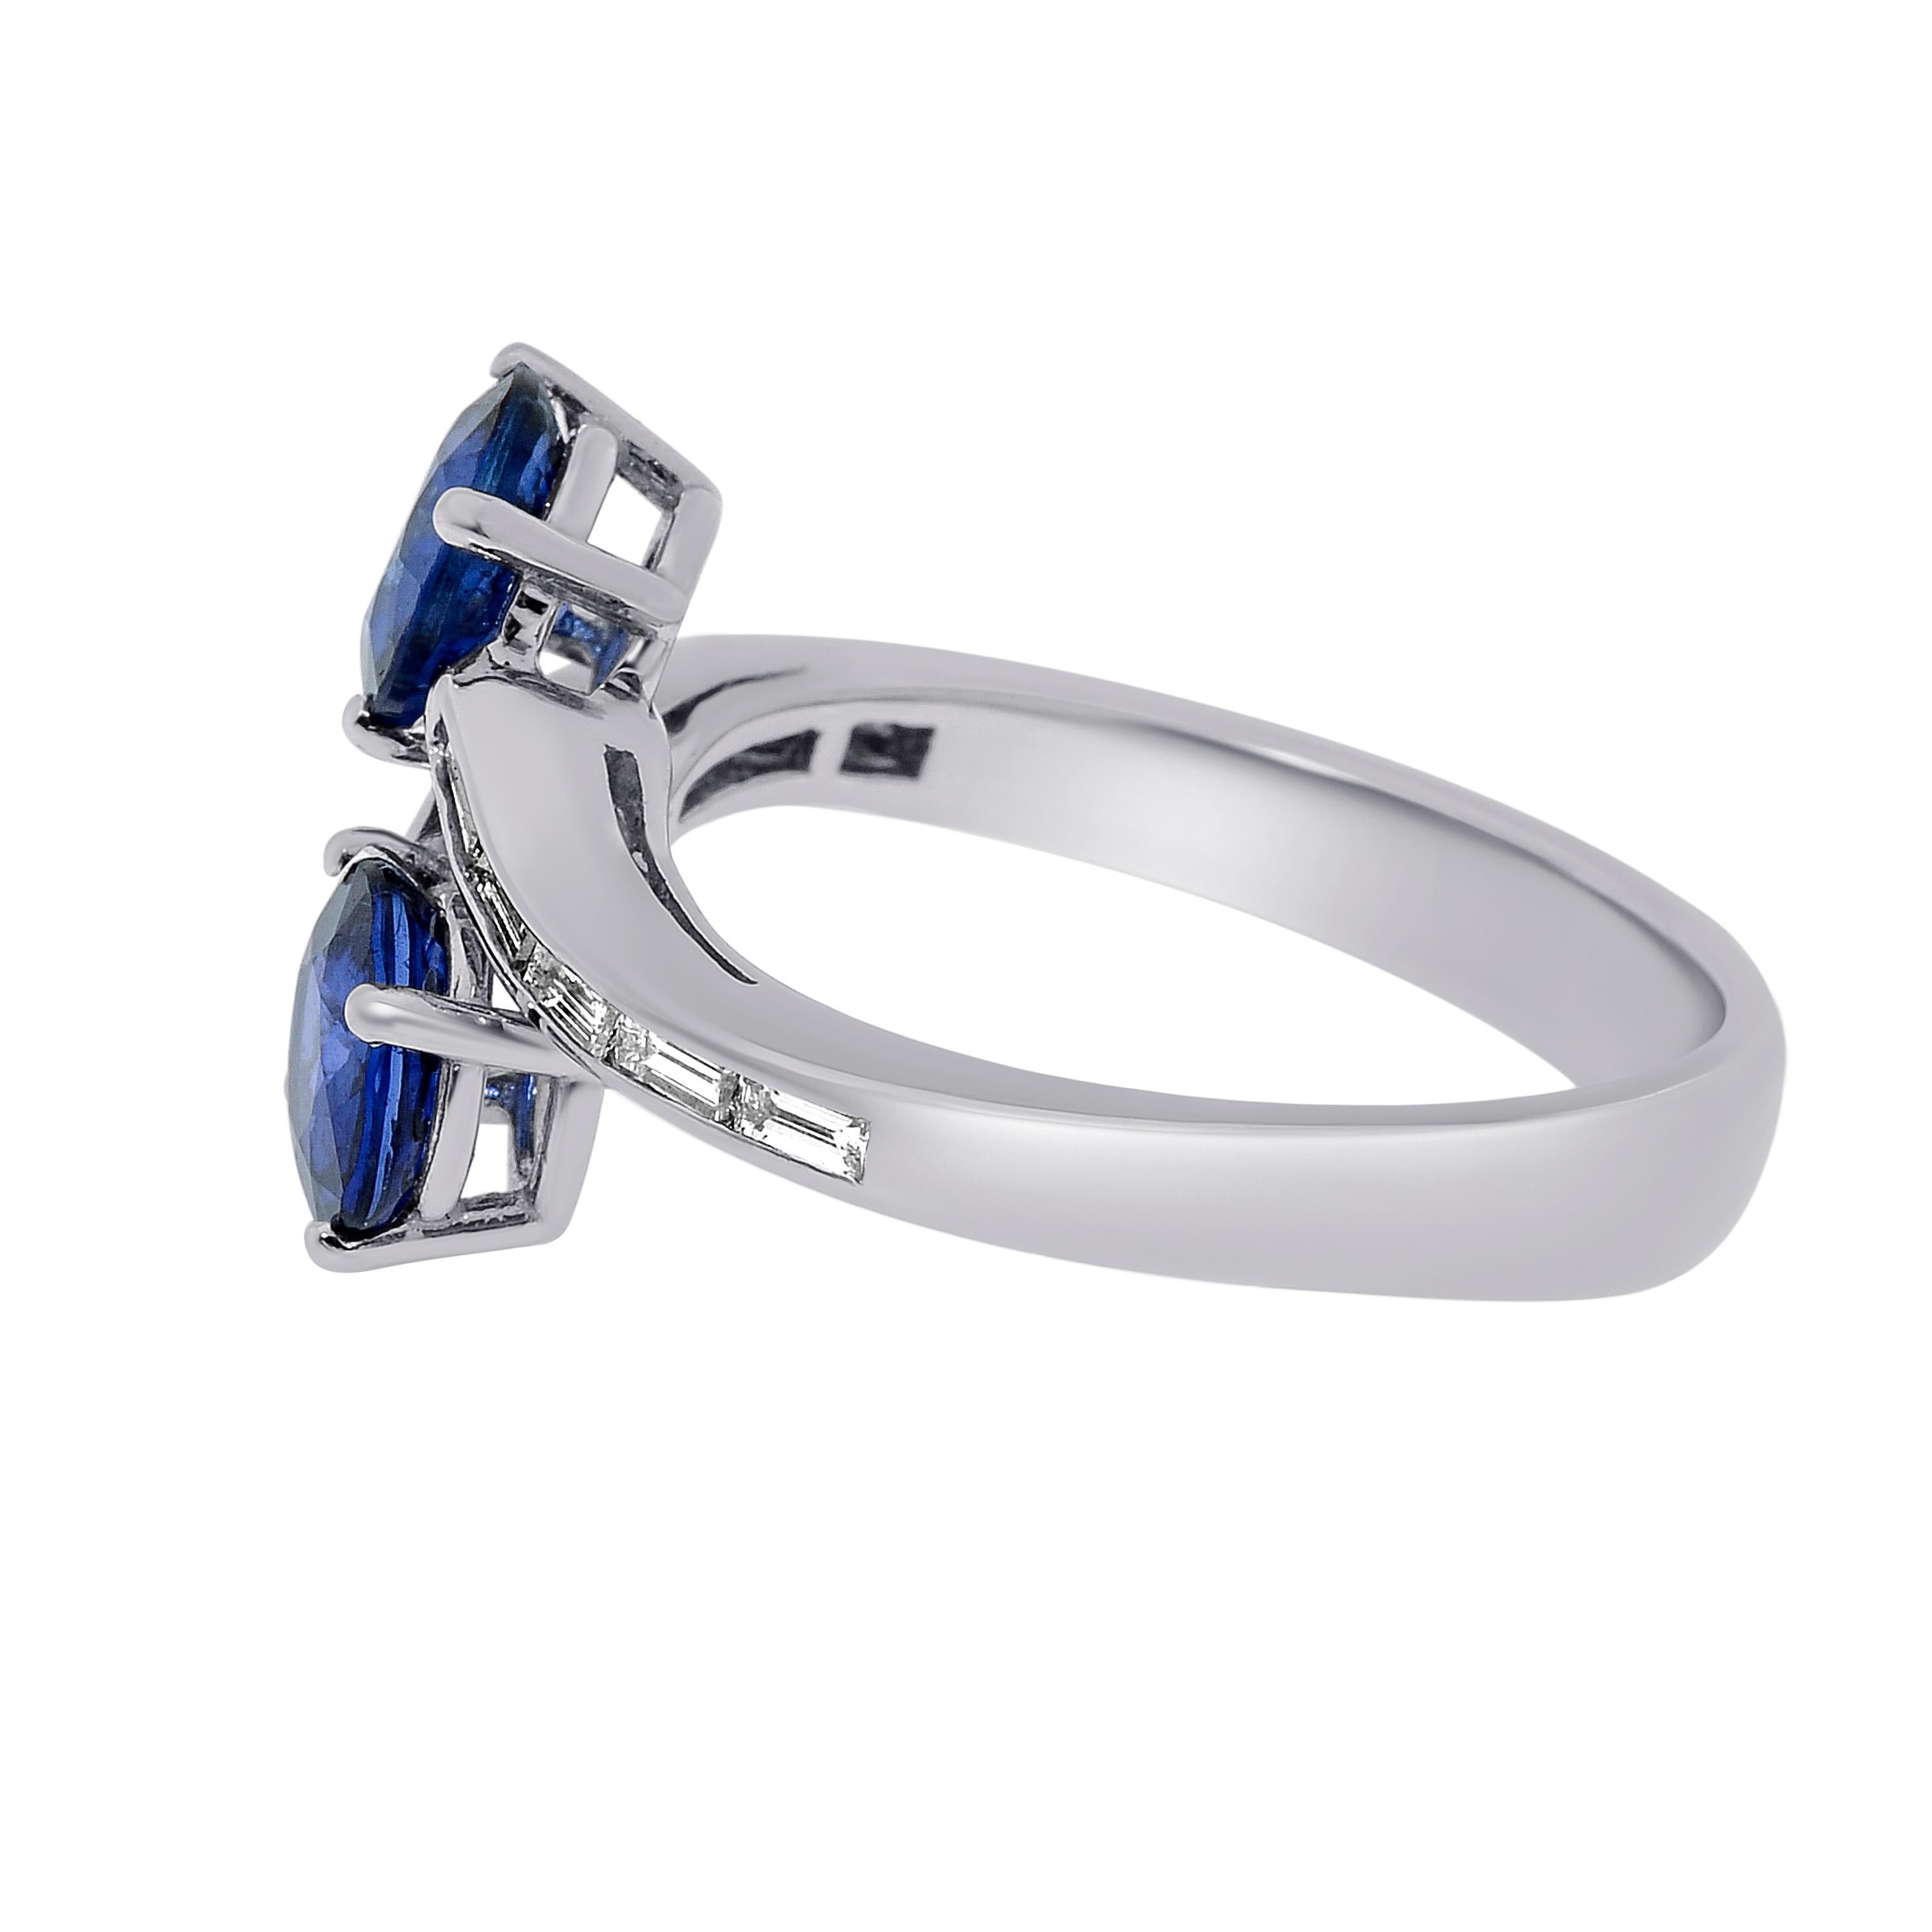 Contemporary Zydo 18K White Gold, Sapphire & Diamond Contrarier Ring sz. 6.5 For Sale